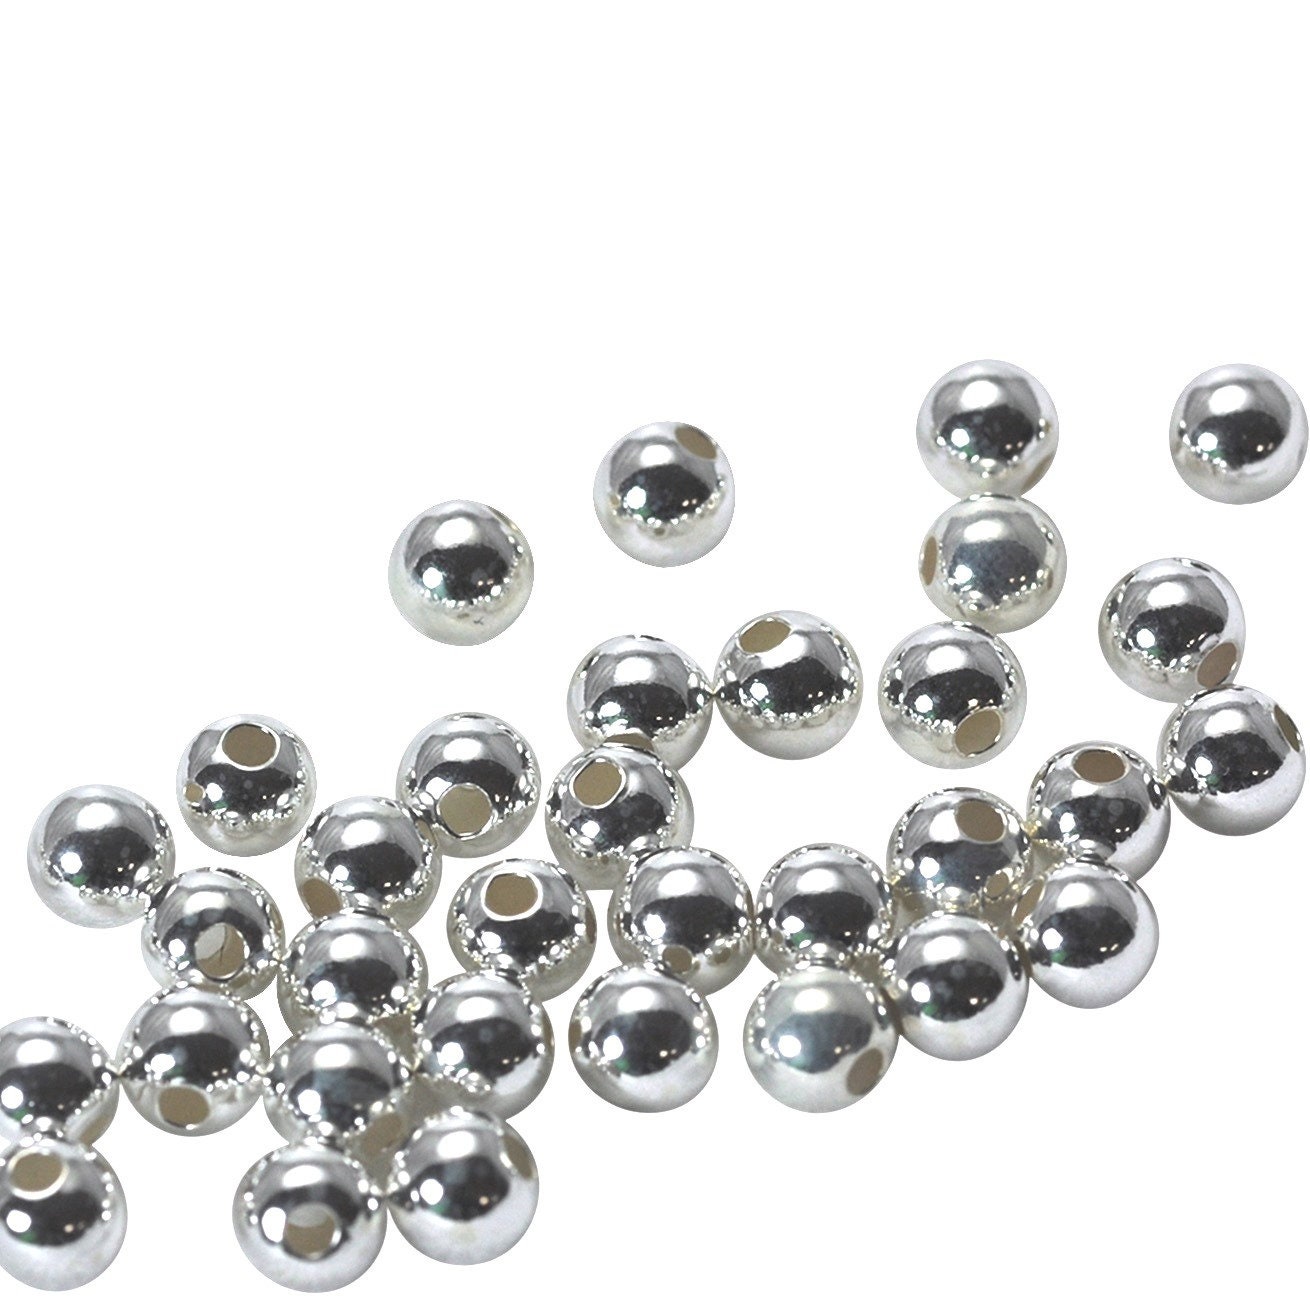 Sterling Silver Spacer Beads in 3/4/5/6/7mm, Rondelle Seamless